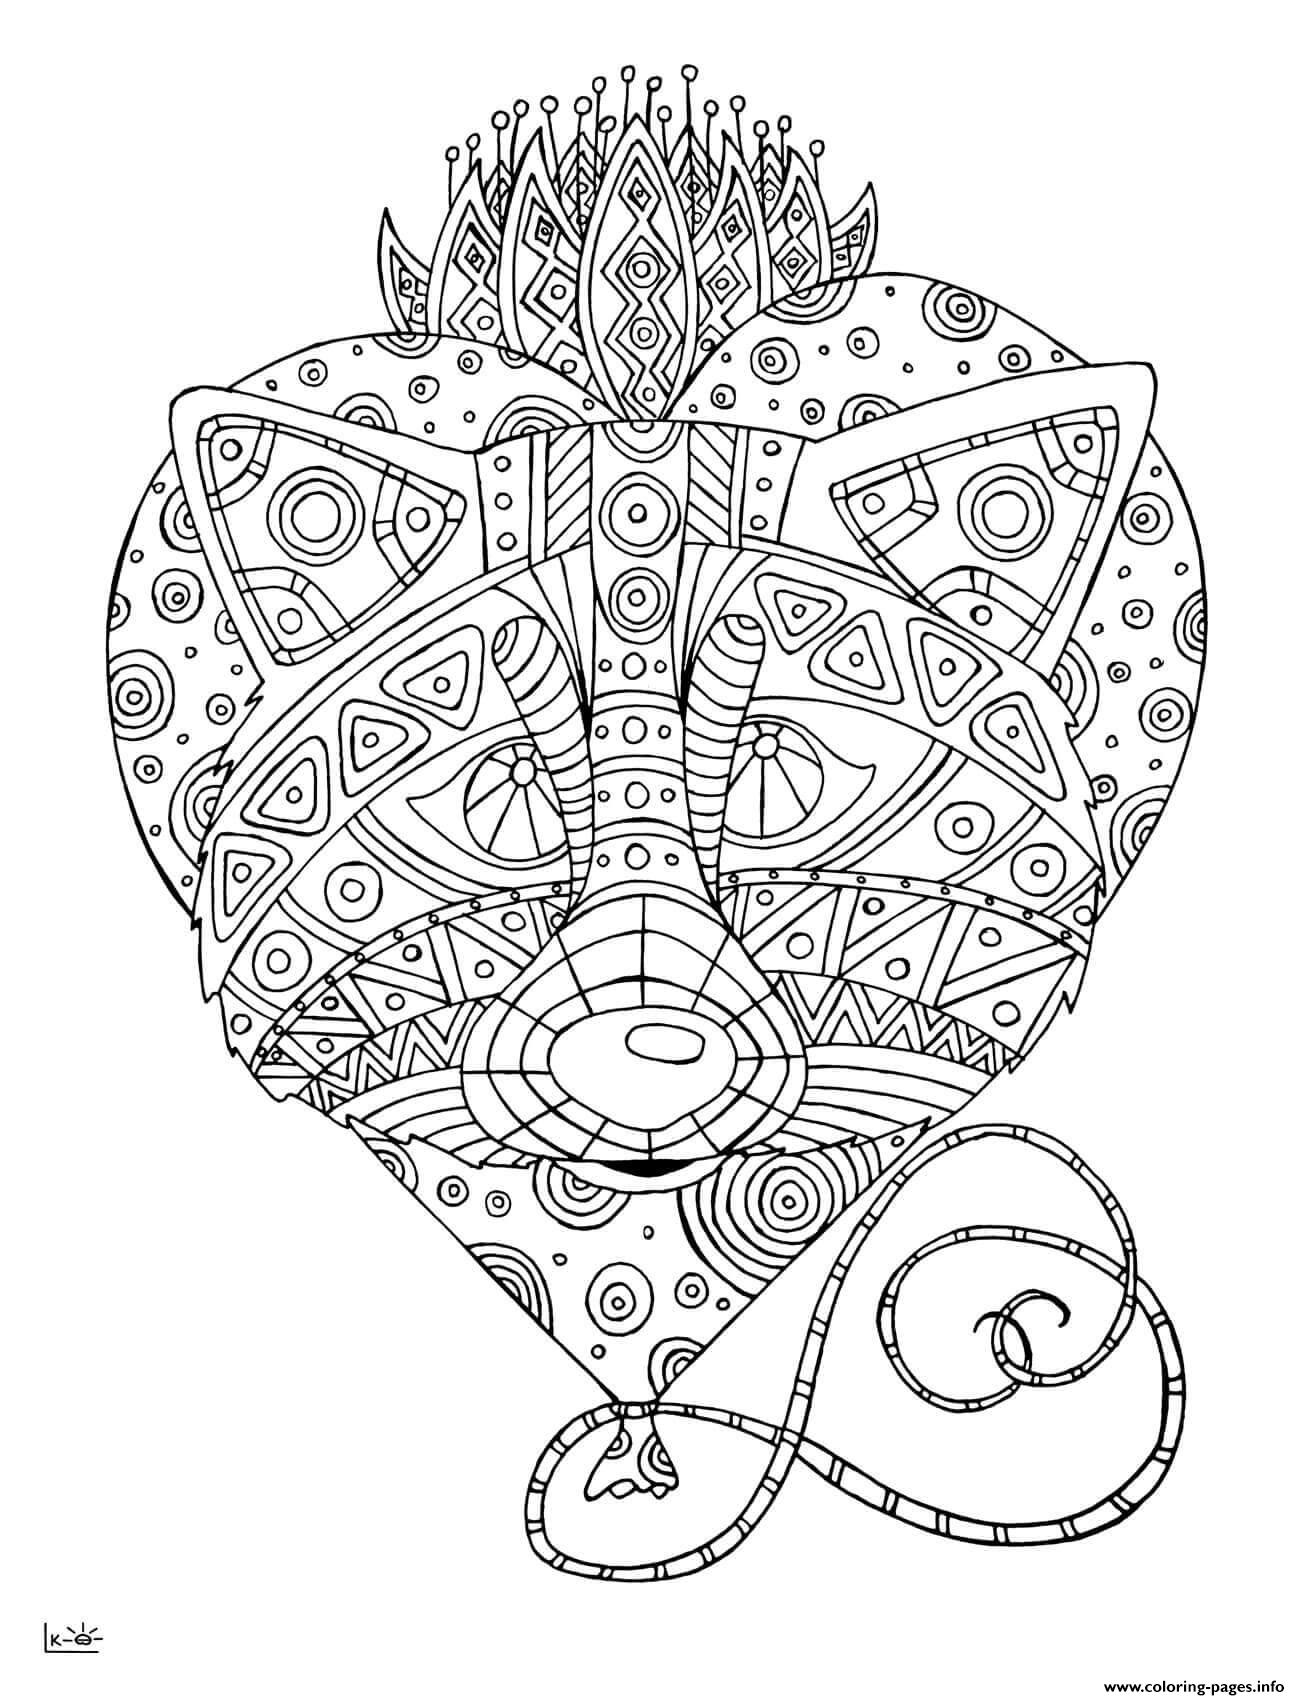 Raccoon Tribal Pattern Adults Coloring Pages Printable Designs